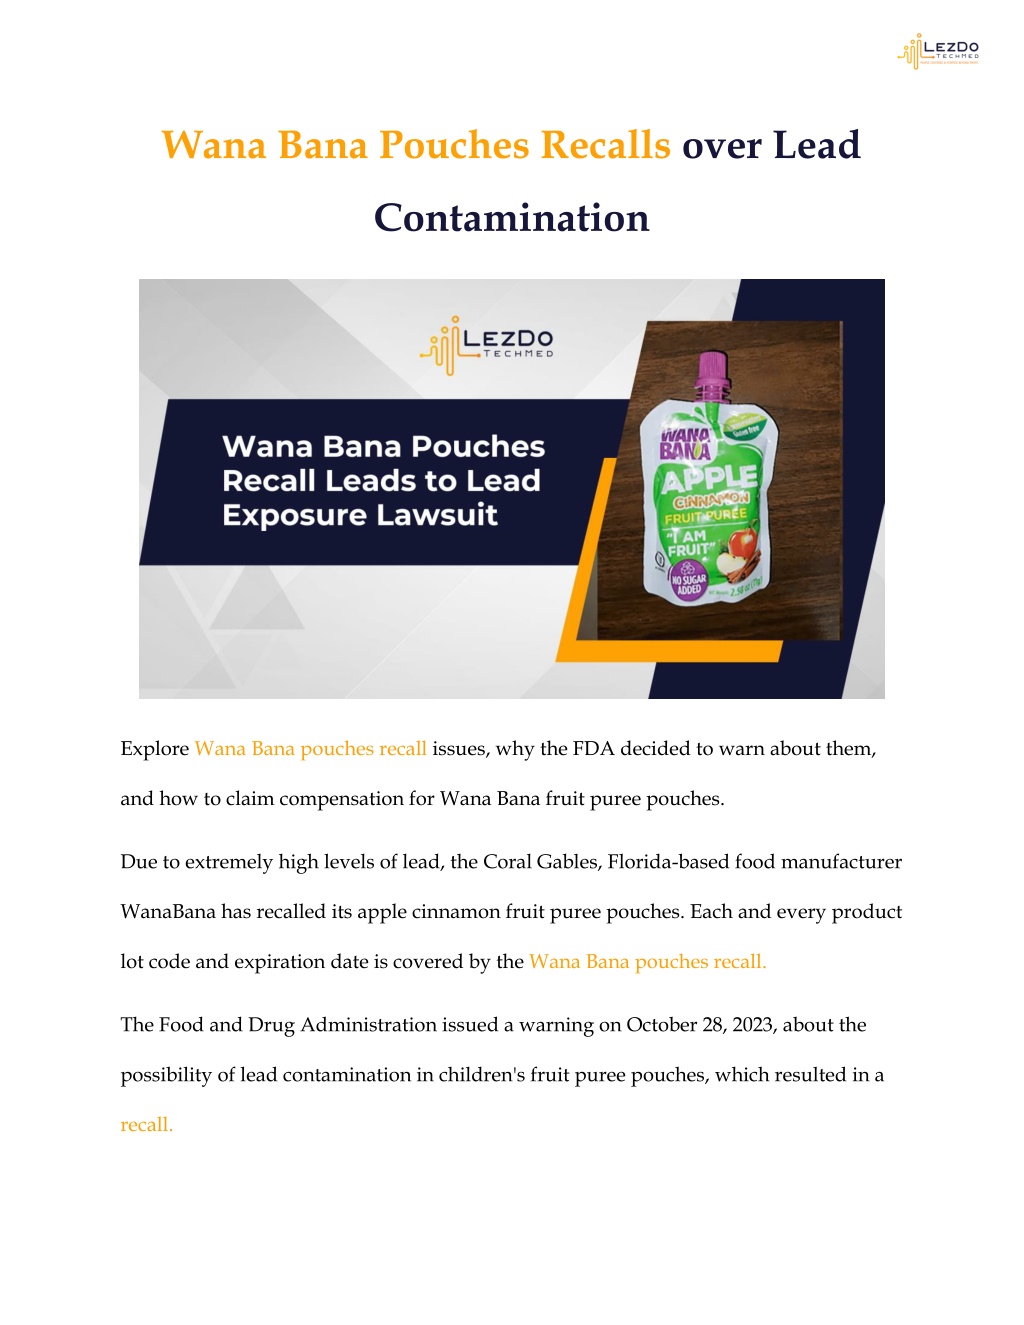 PPT Wana Bana Pouches Recalls over Lead Contamination PowerPoint